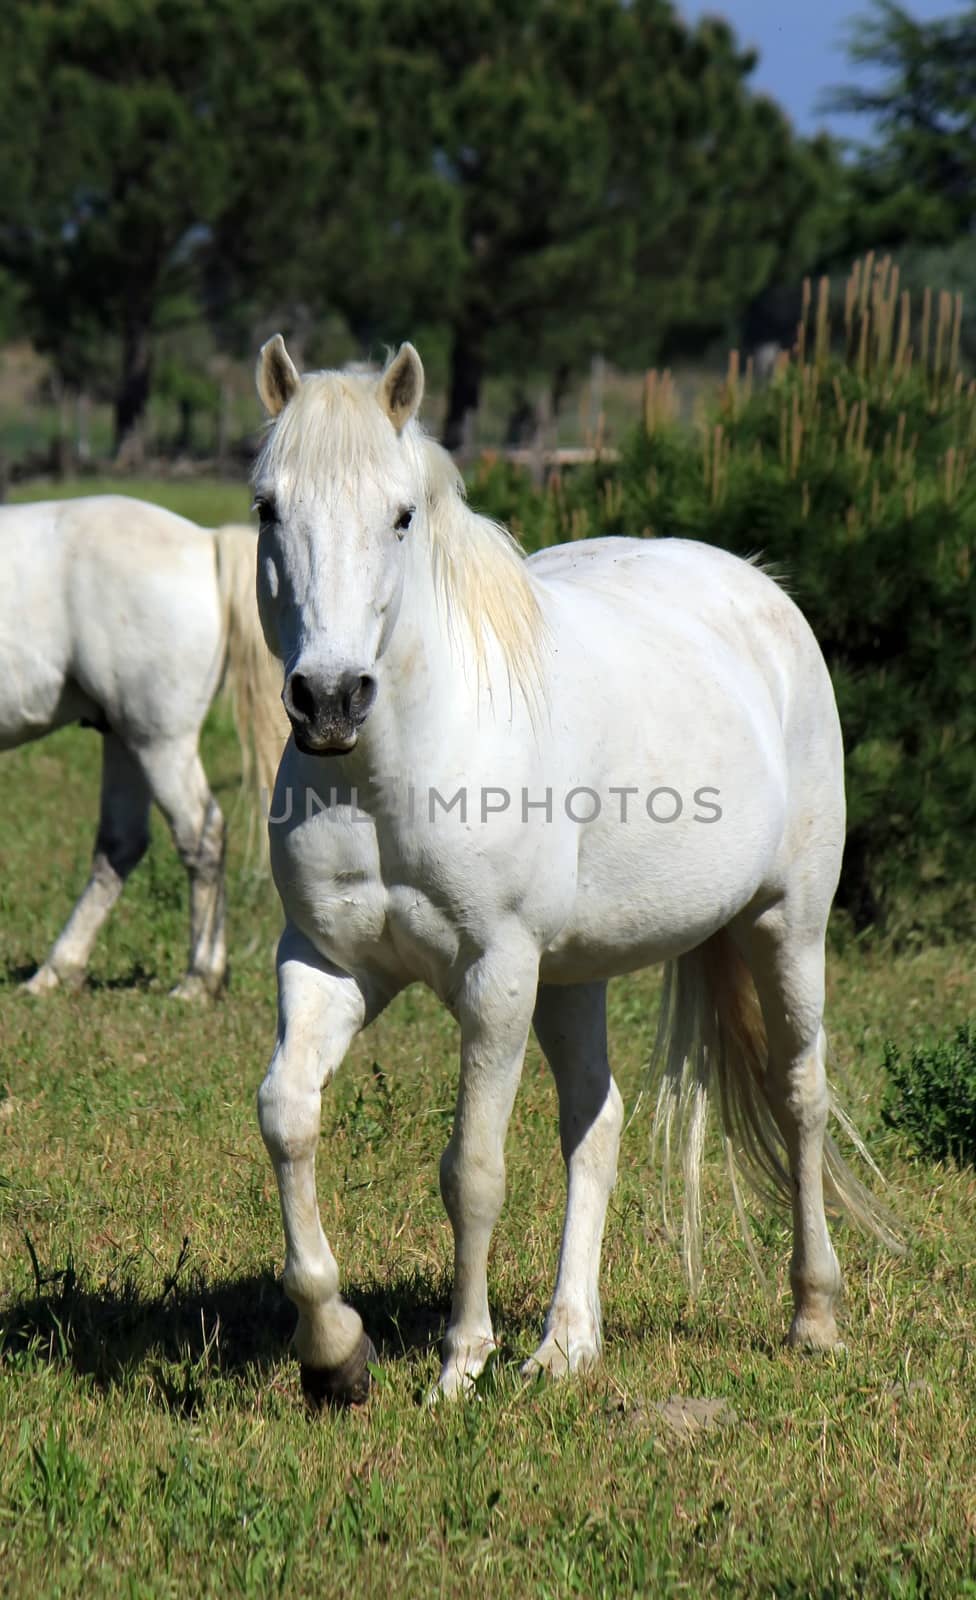 Horses in Camargue, France by Elenaphotos21